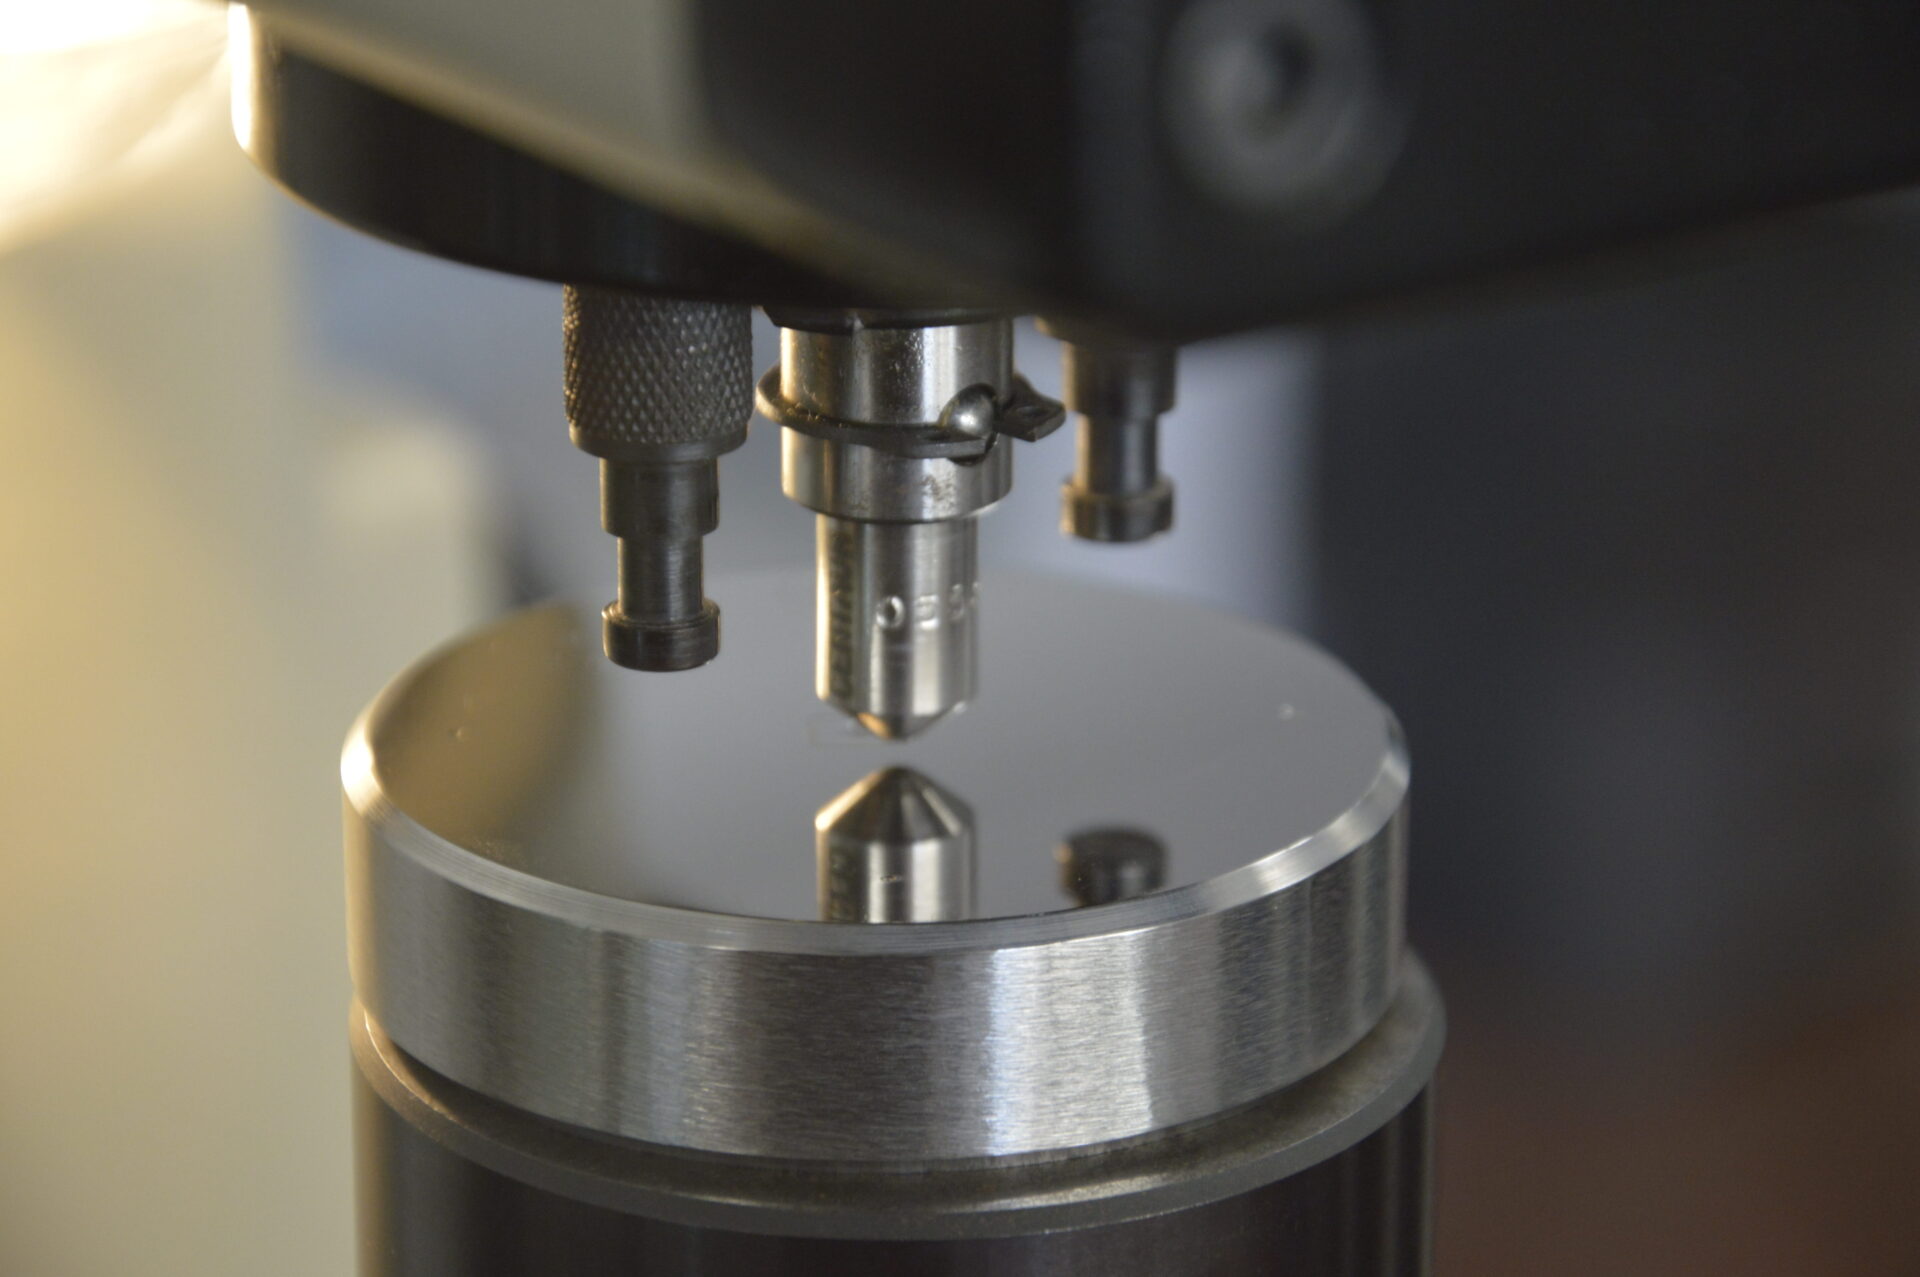 A hardness tester calibration ensures machines provide reliable results.